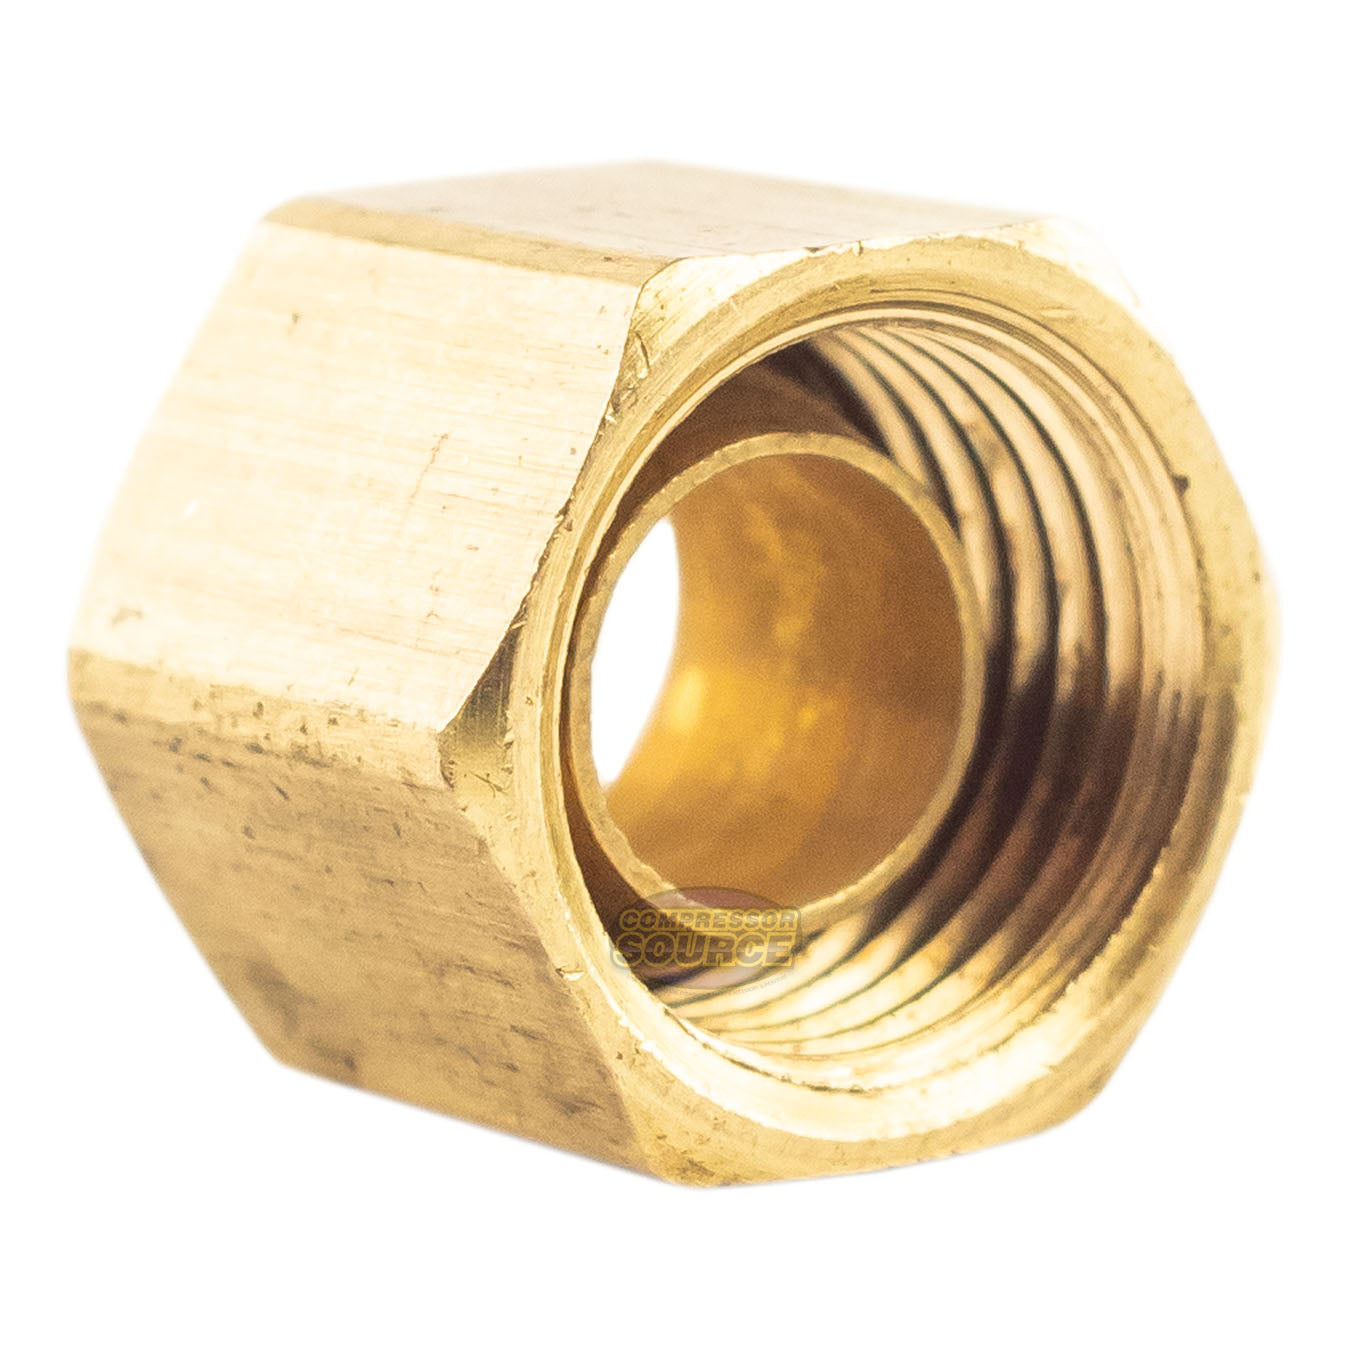 10 Pack 1/4" Compression Nut & Ferrule Combo for 1/4" OD Tube Brass Sleeve Nut